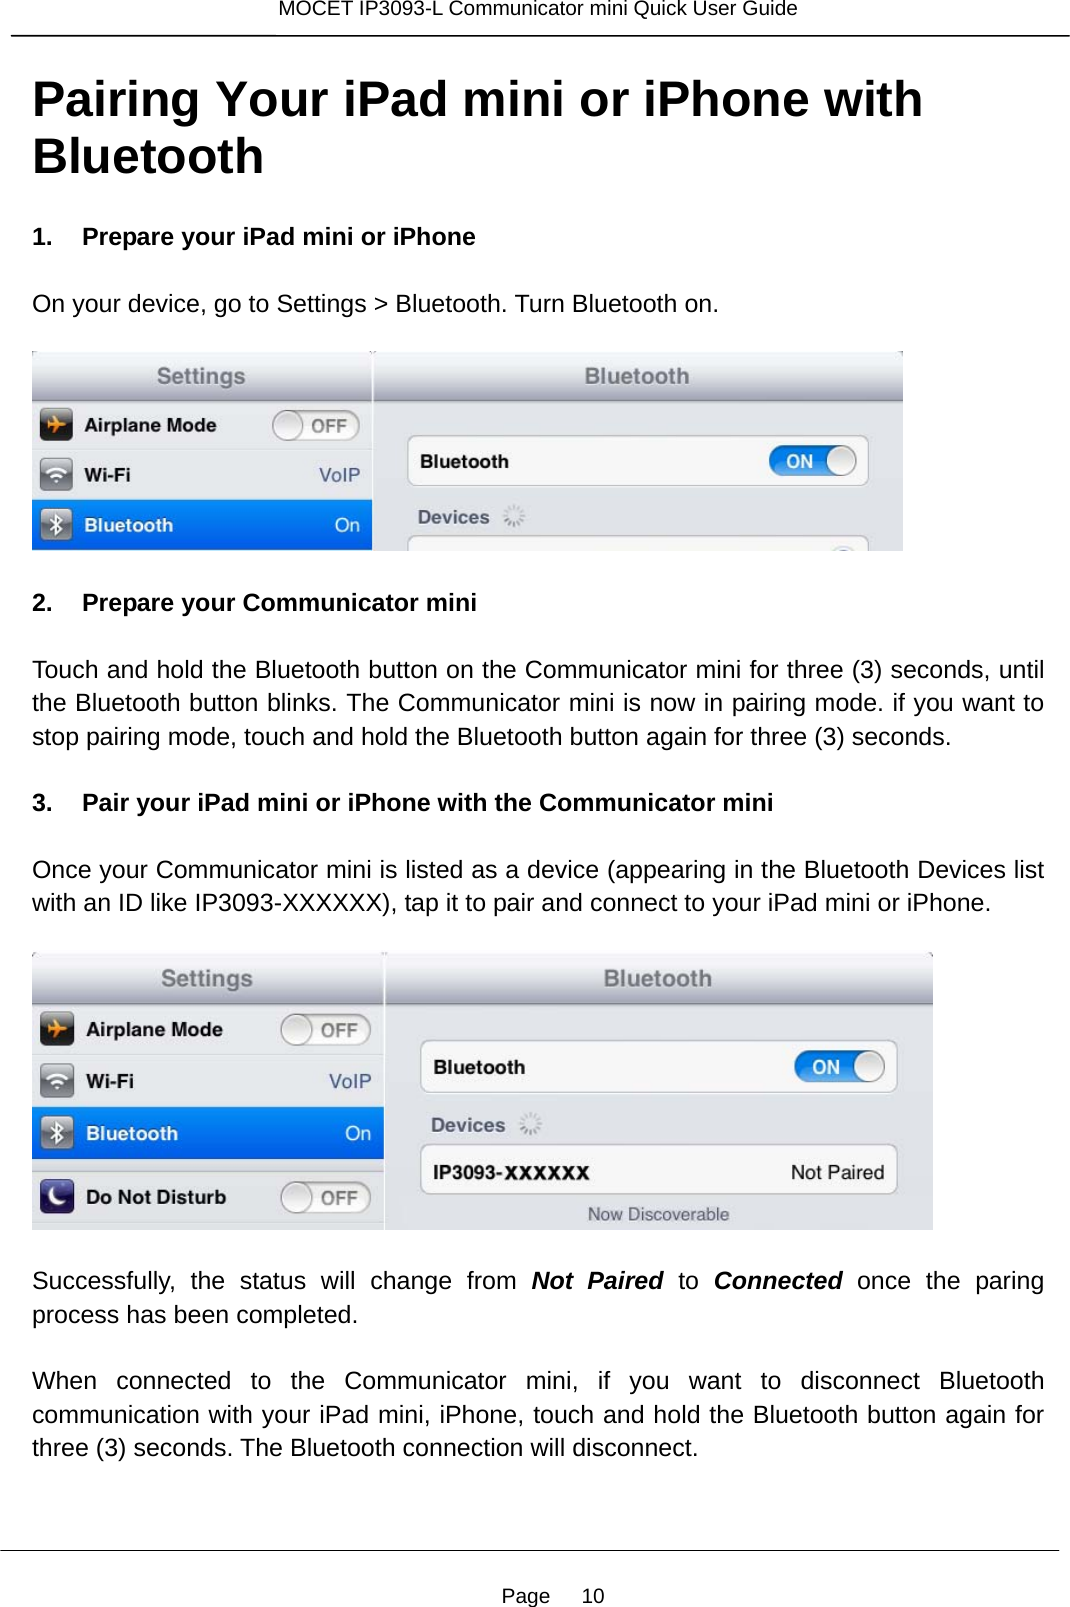 Page   10 MOCET IP3093-L Communicator mini Quick User Guide  Pairing Your iPad mini or iPhone with Bluetooth  1. Prepare your iPad mini or iPhone  On your device, go to Settings &gt; Bluetooth. Turn Bluetooth on.    2. Prepare your Communicator mini  Touch and hold the Bluetooth button on the Communicator mini for three (3) seconds, until the Bluetooth button blinks. The Communicator mini is now in pairing mode. if you want to stop pairing mode, touch and hold the Bluetooth button again for three (3) seconds.  3. Pair your iPad mini or iPhone with the Communicator mini  Once your Communicator mini is listed as a device (appearing in the Bluetooth Devices list with an ID like IP3093-XXXXXX), tap it to pair and connect to your iPad mini or iPhone.    Successfully, the status will change from Not Paired to Connected  once the paring process has been completed.  When connected to the Communicator mini, if you want to disconnect Bluetooth communication with your iPad mini, iPhone, touch and hold the Bluetooth button again for three (3) seconds. The Bluetooth connection will disconnect.    